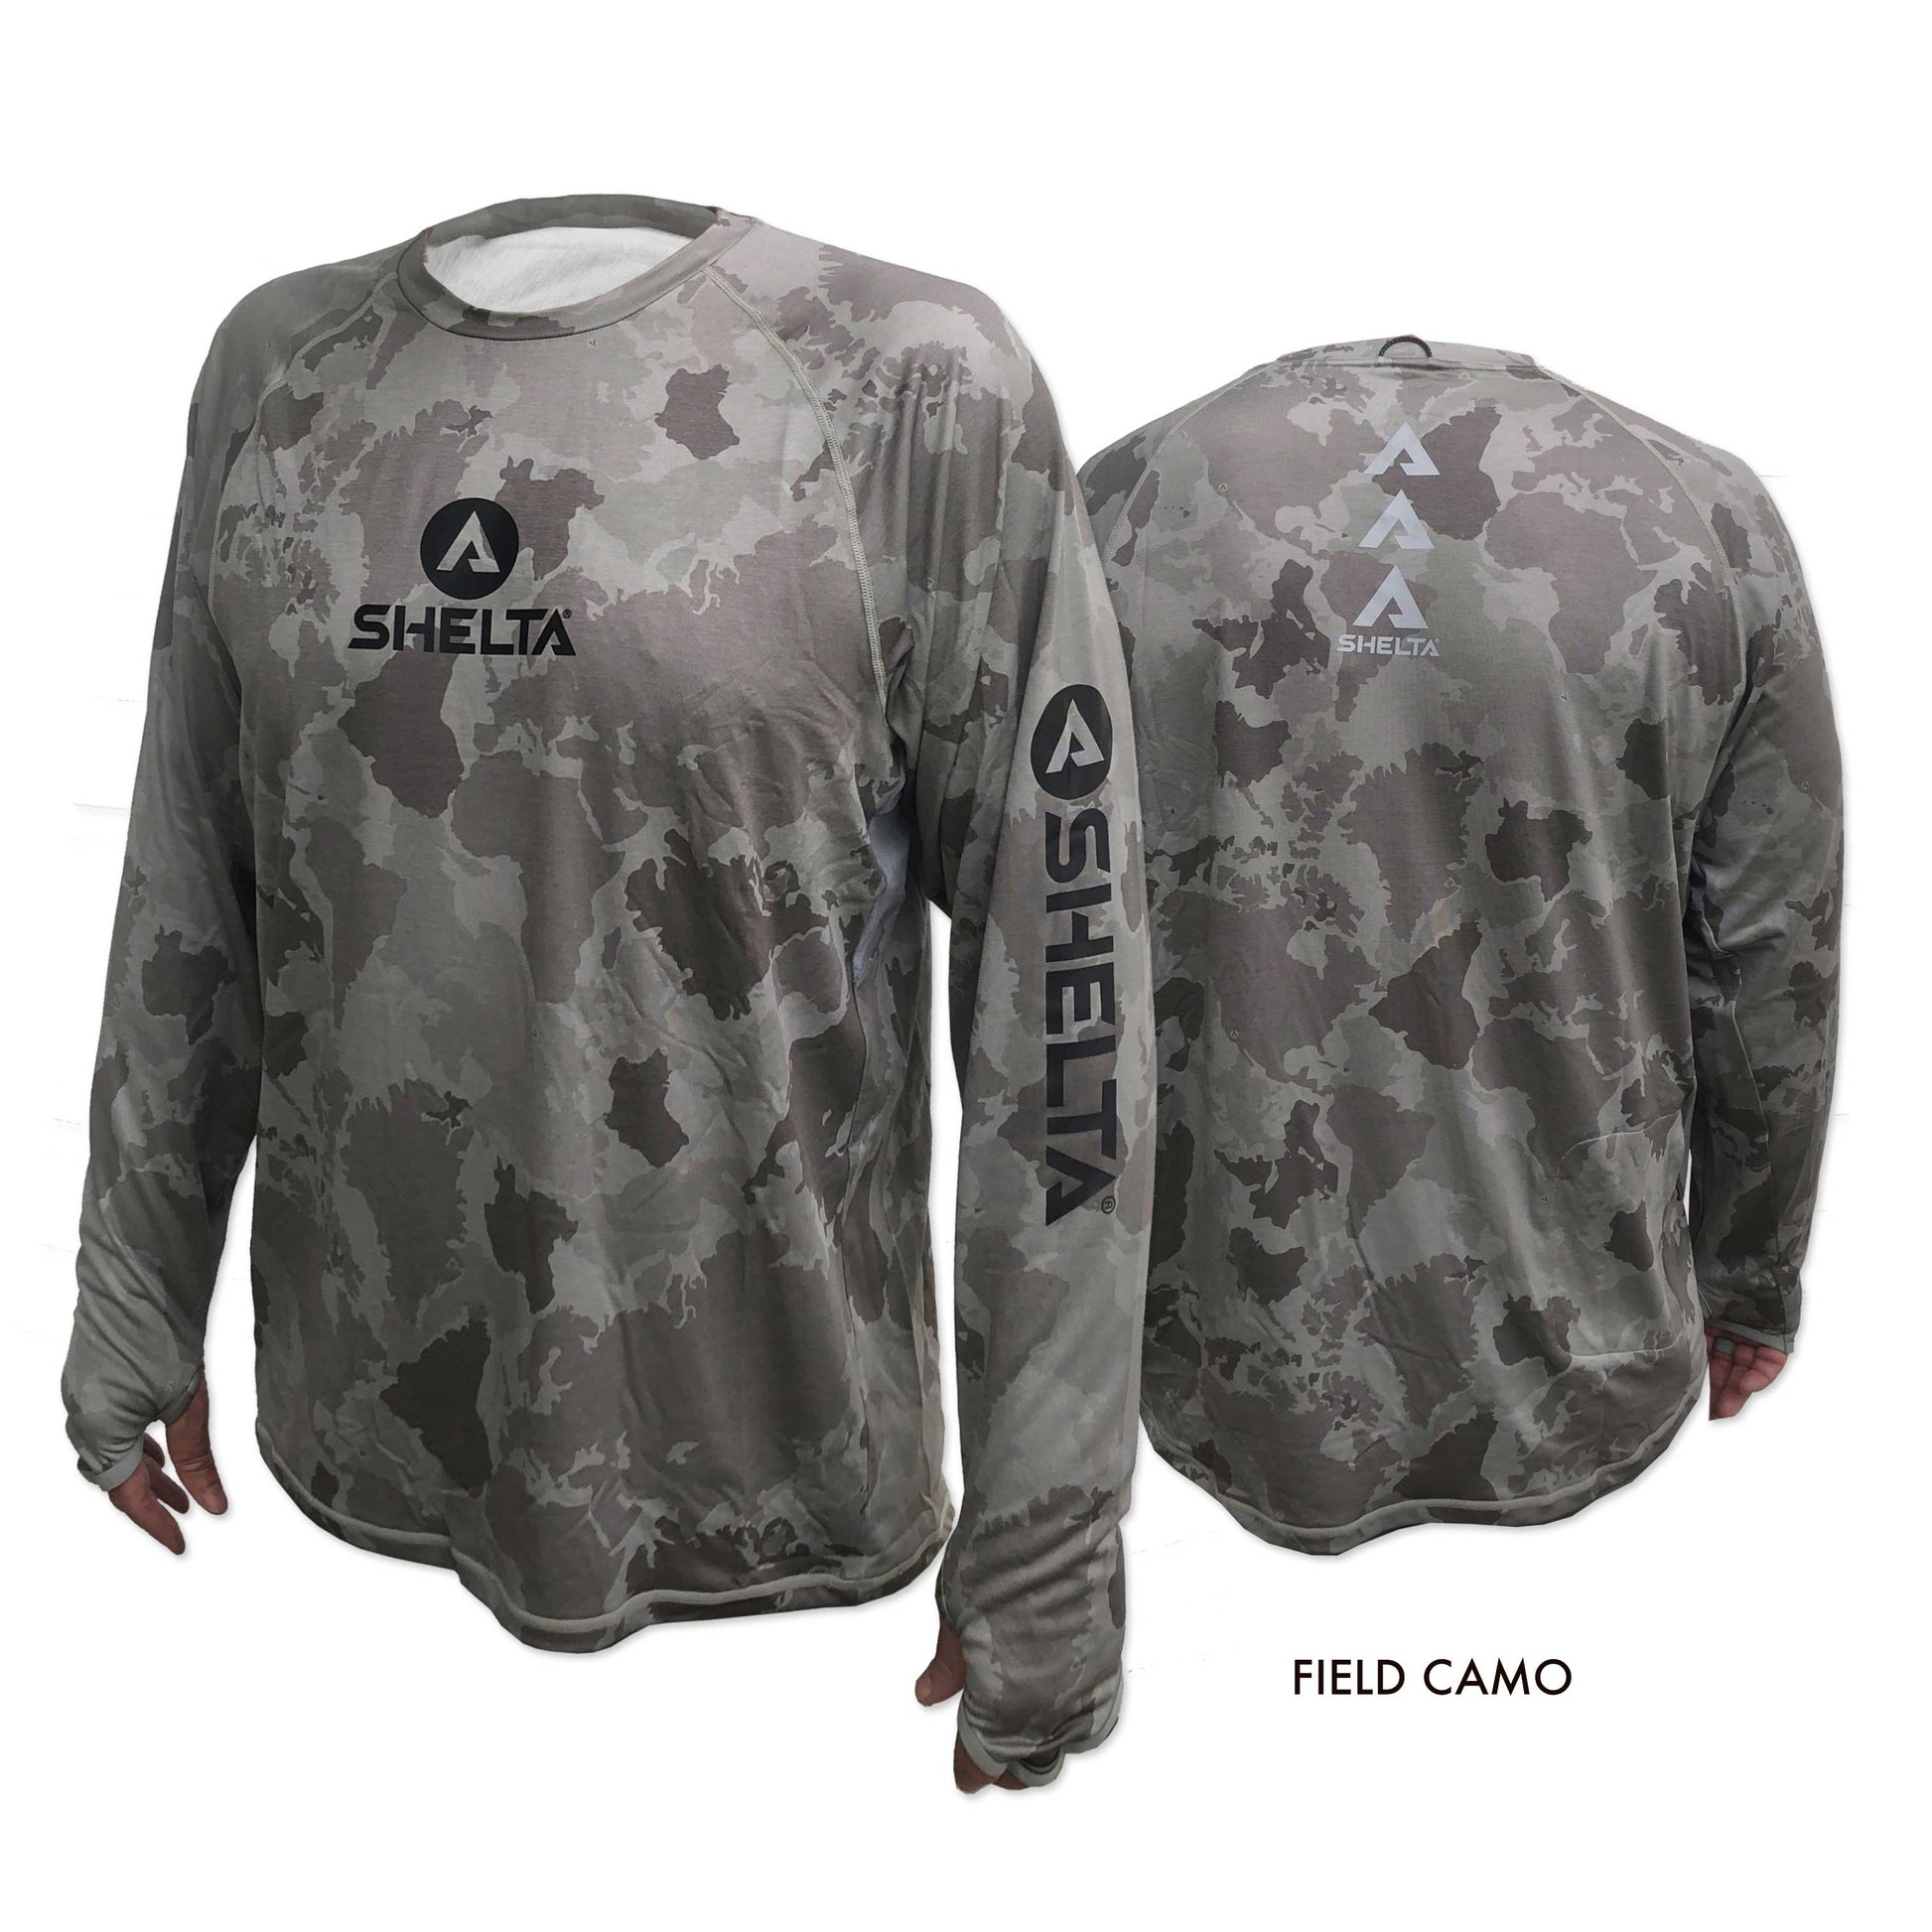 The Aquaterra Crew neck in Field Camo is engineered & built with sun protection, function, and durability in mind.  Truly amphibious these technical tops work as well in the water as on land.  Offering features consistent with Shelta core values and innovation goals.   UPF 50+ UV protection, the highest rating given.  Blocks 98% of UVA/UVB radiation.